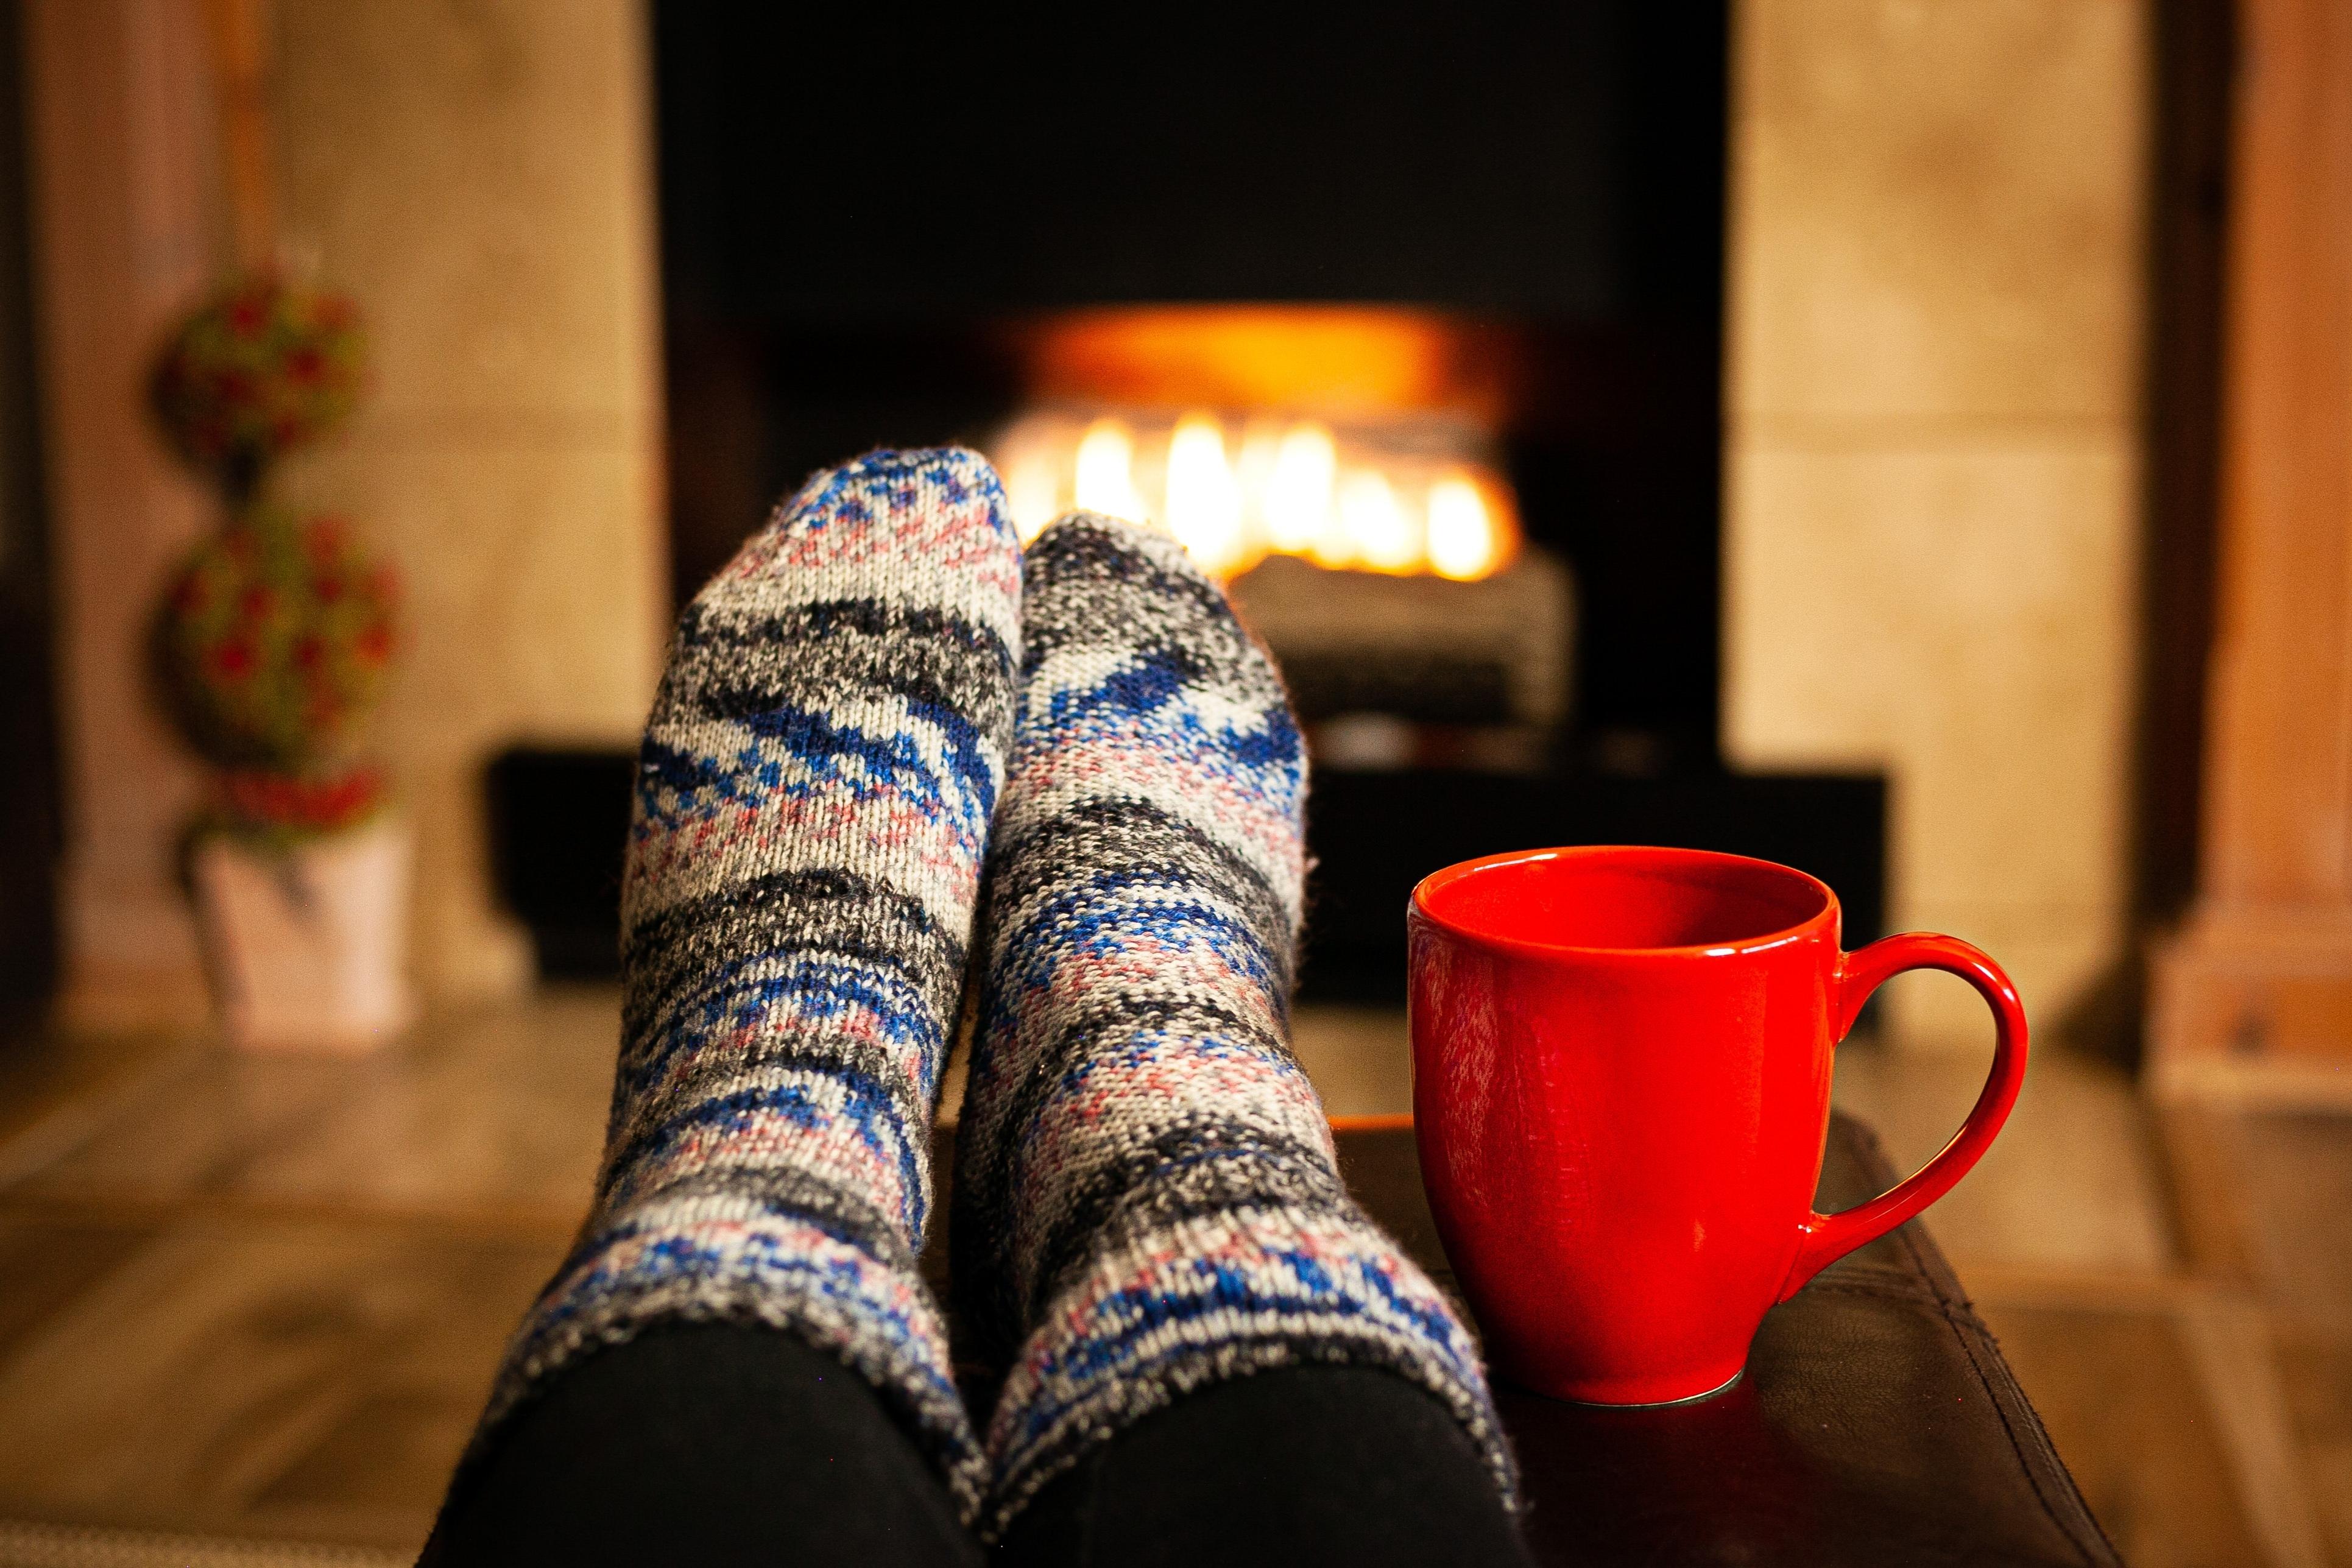 Picture of a persons feet in warm socks in front of a fire with a red mug